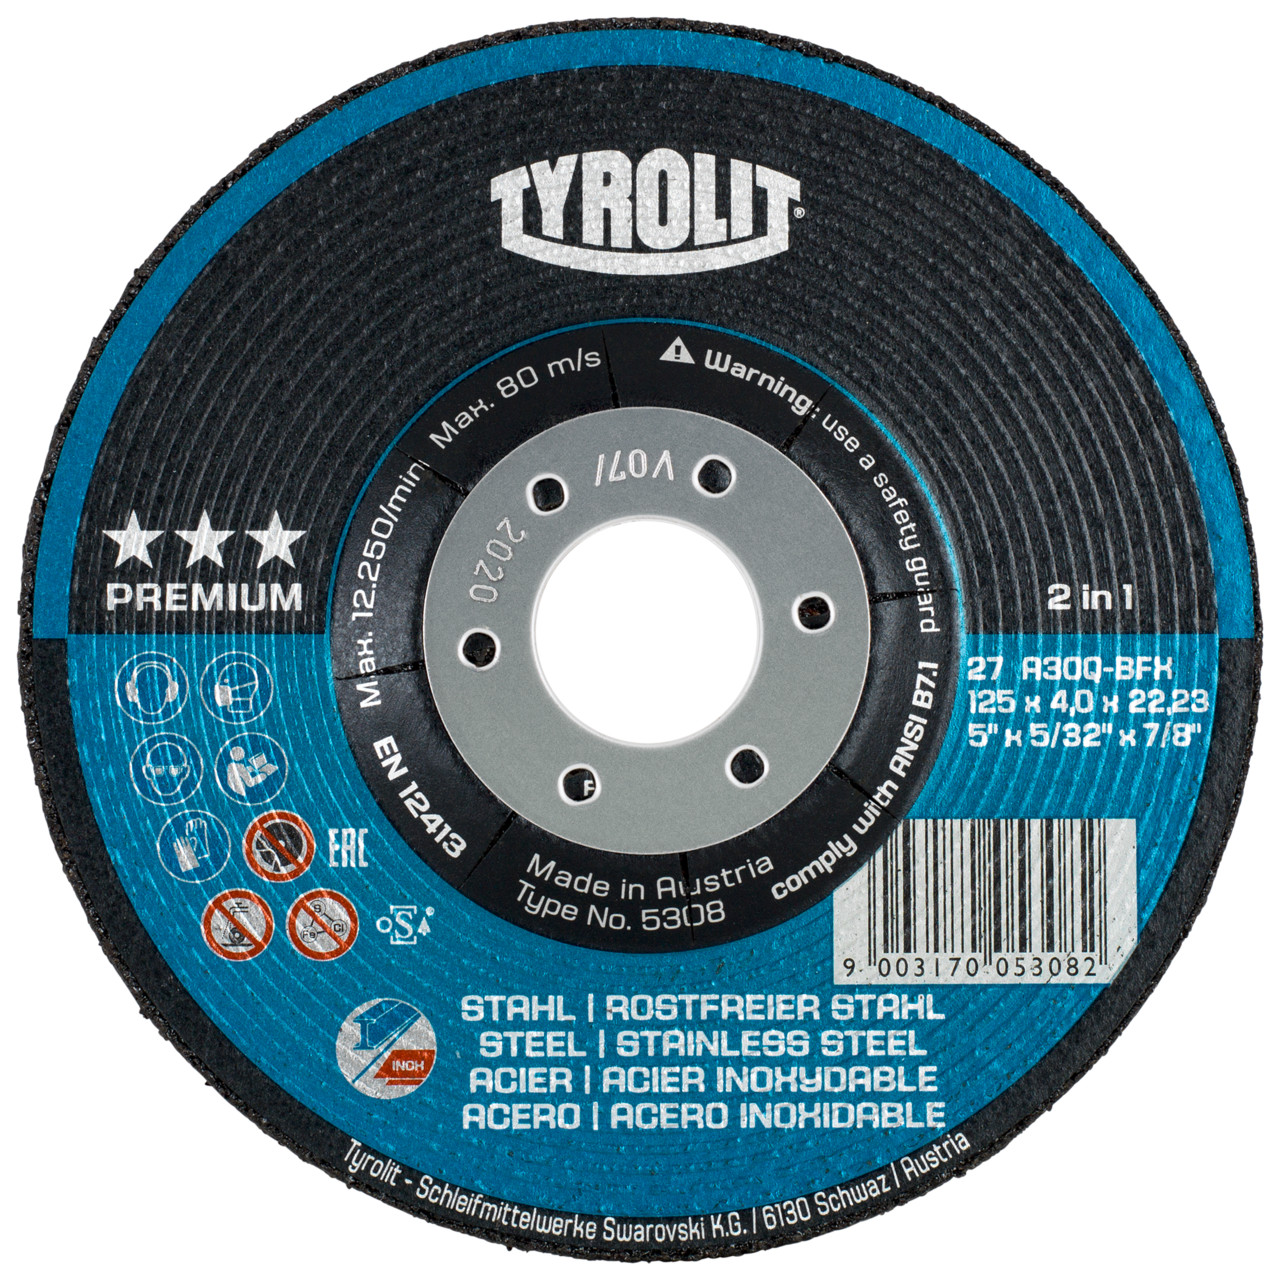 TYROLIT grinding wheel DxUxH 178x4x22.23 2in1 for steel and stainless steel, shape: 27 - offset version, Art. 5349